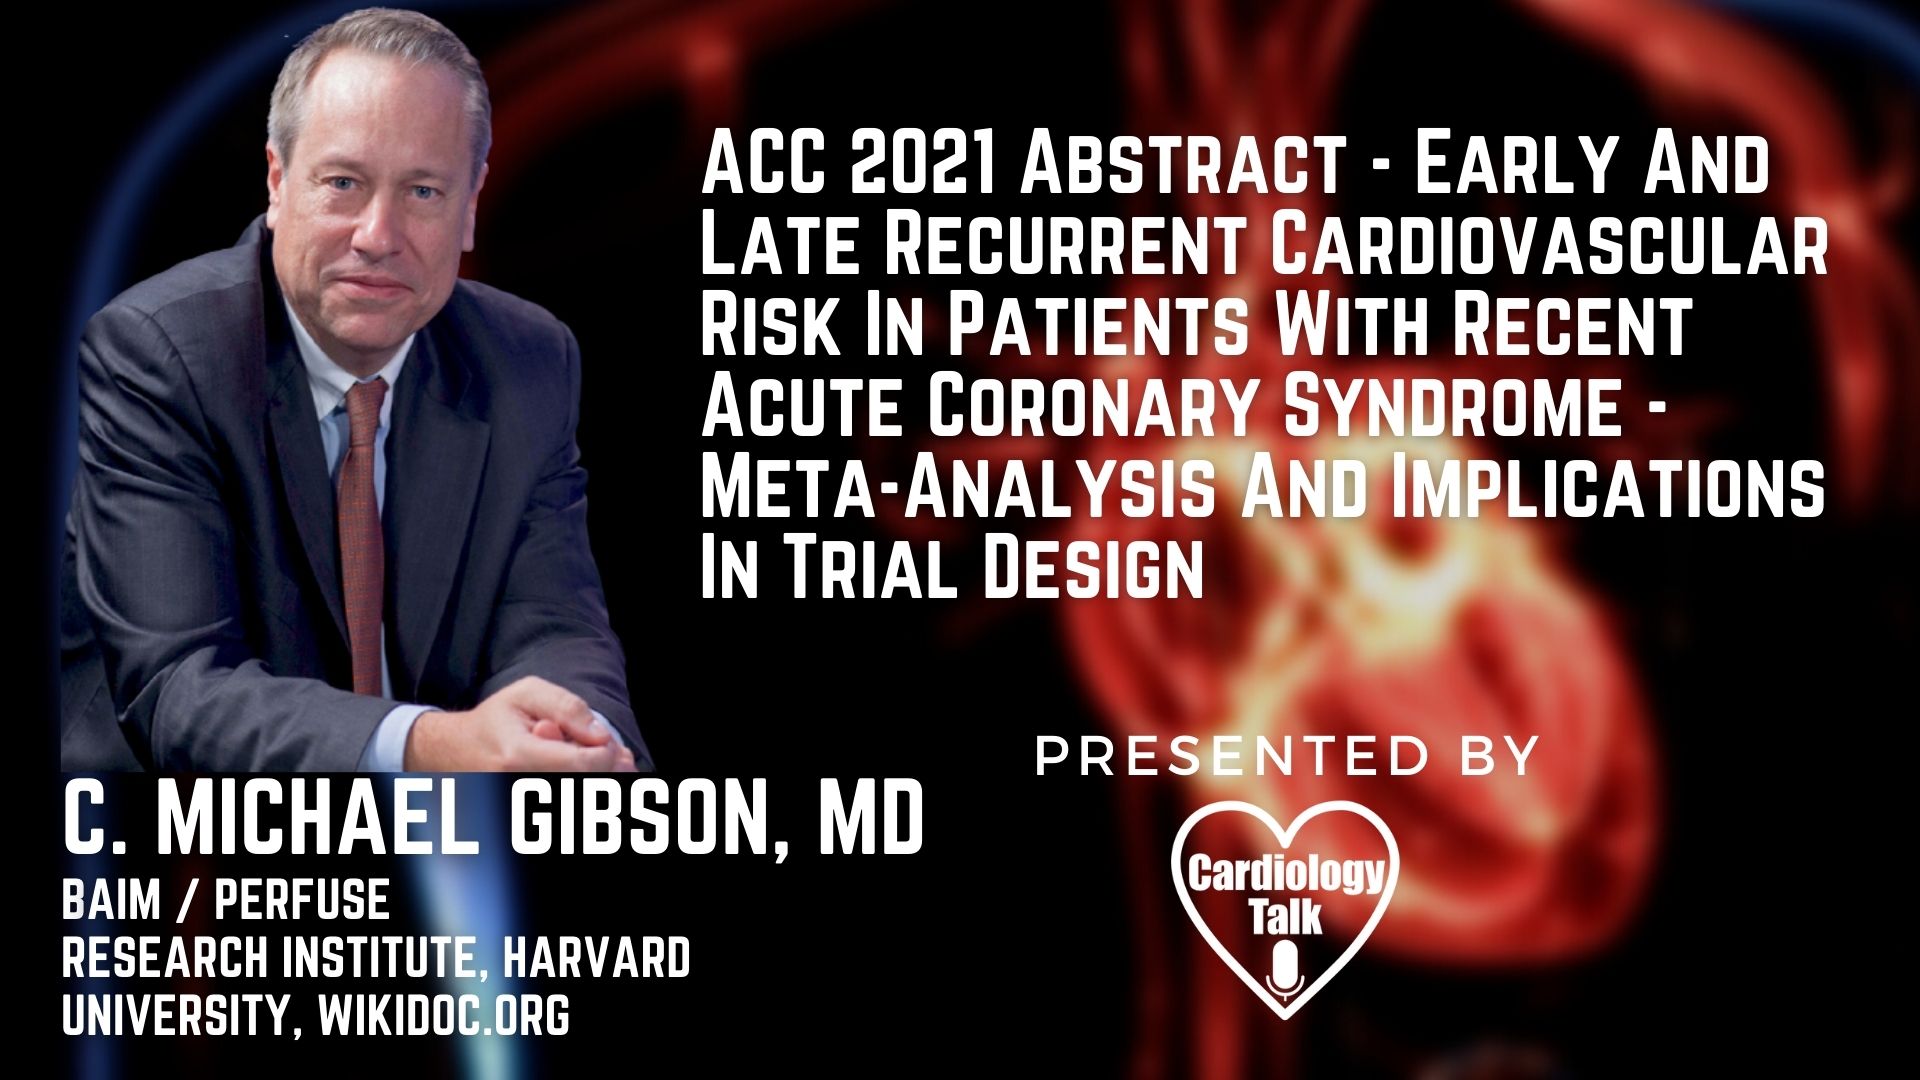 C. Michael Gibson, MD @CMichaelGibson @BaimInstitute @harvardmed #ACC21 #AcuteCoronarySyndrome #Cardiology #Research Early And Late Recurrent Cardiovascular Risk In Patients With Recent A...